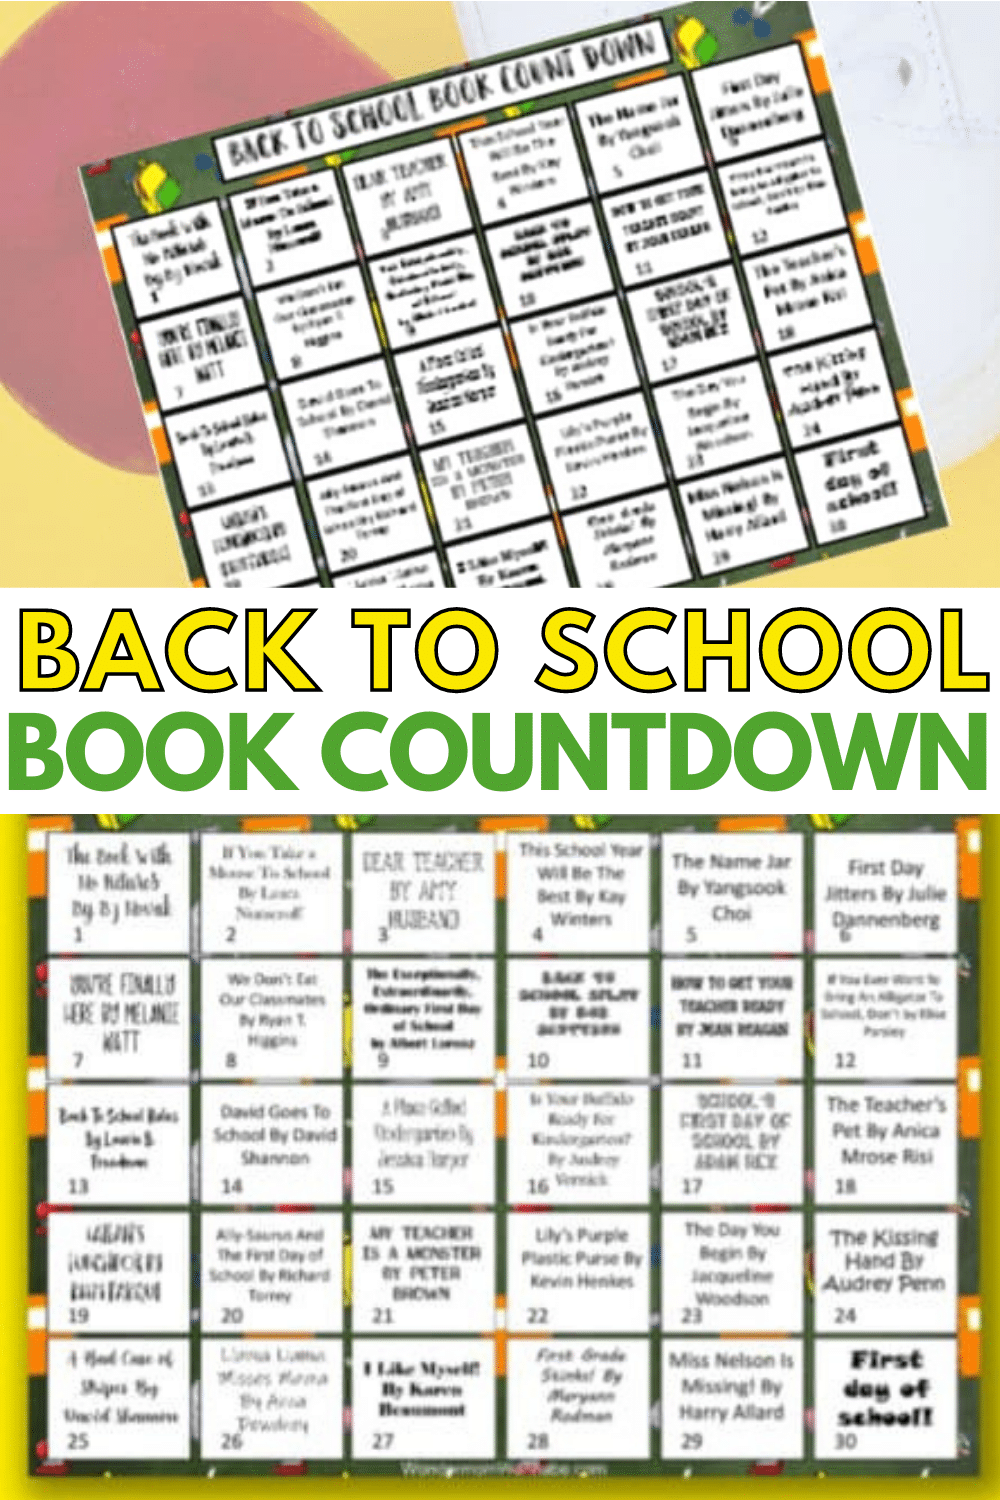 This printable back to school book countdown calendar is perfect for children starting kindergarten. Reading books about school will make them feel at ease. #reading #printables #backtoschool via @wondermomwannab